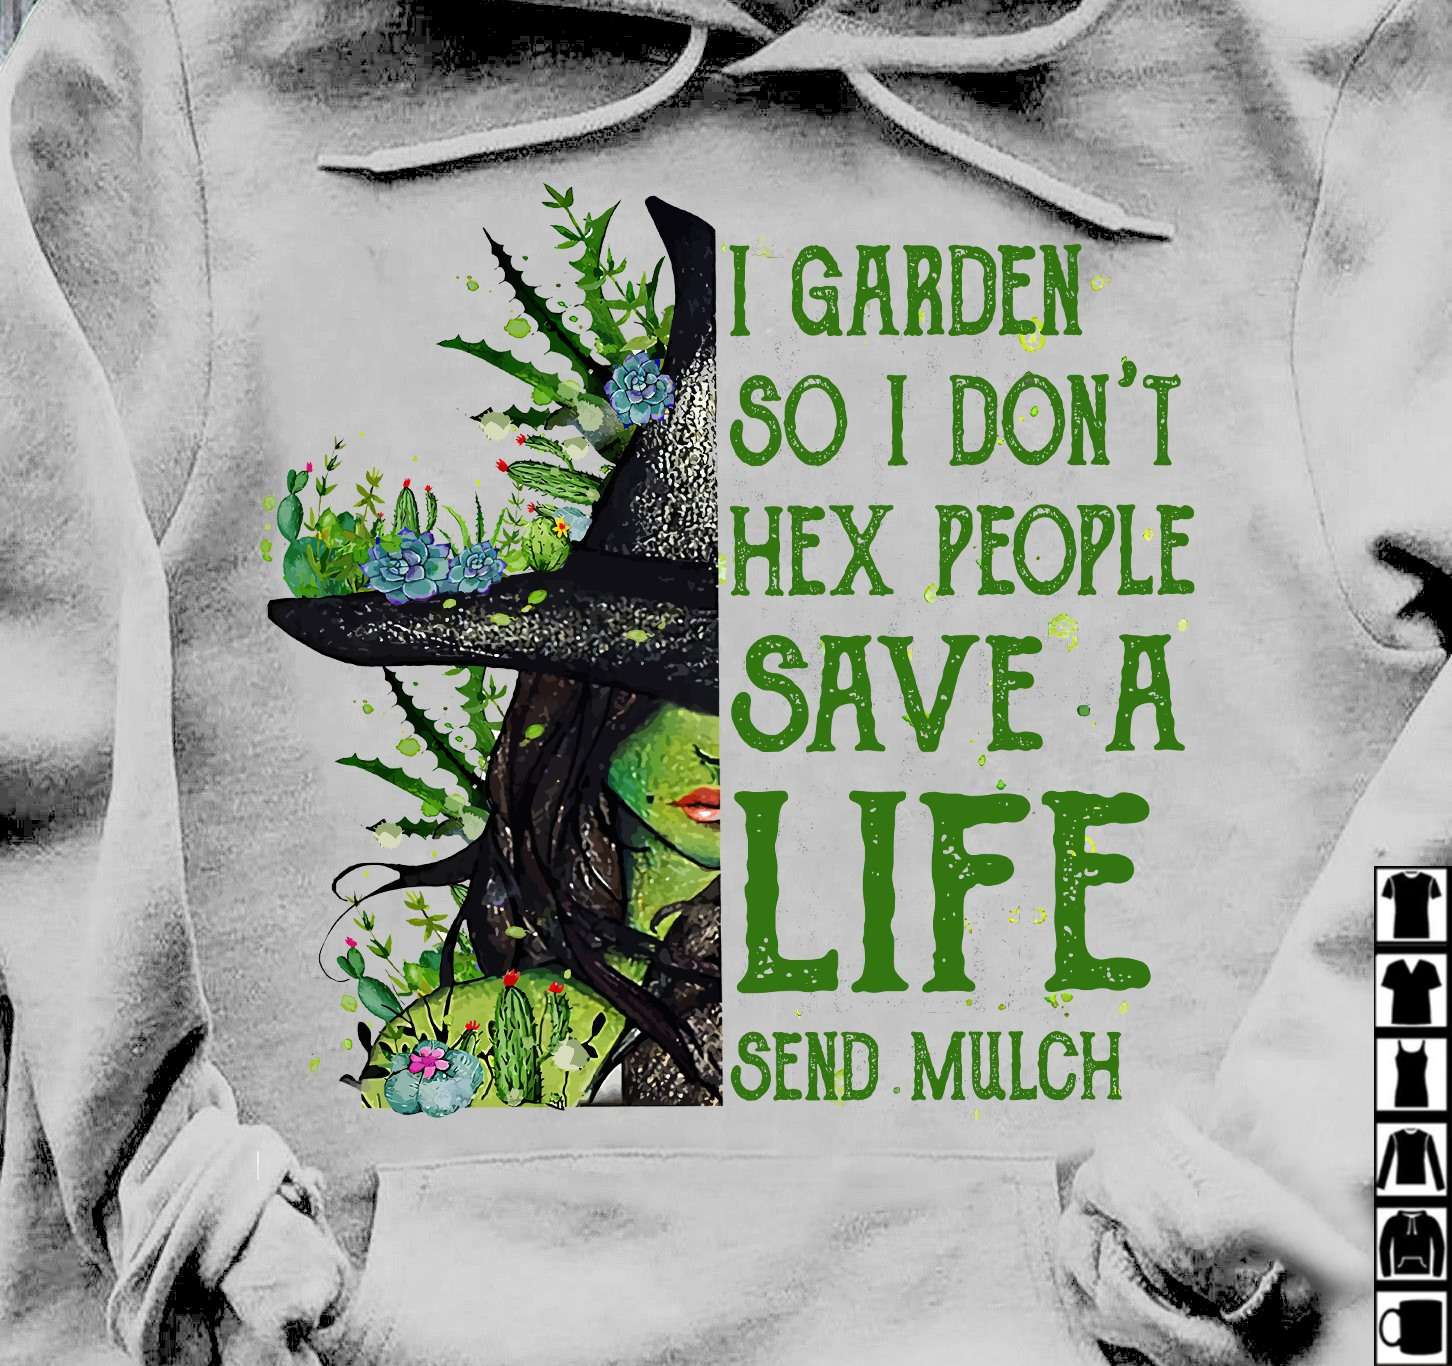 Green Witch - I garden so i don't hex people save a life send mulch